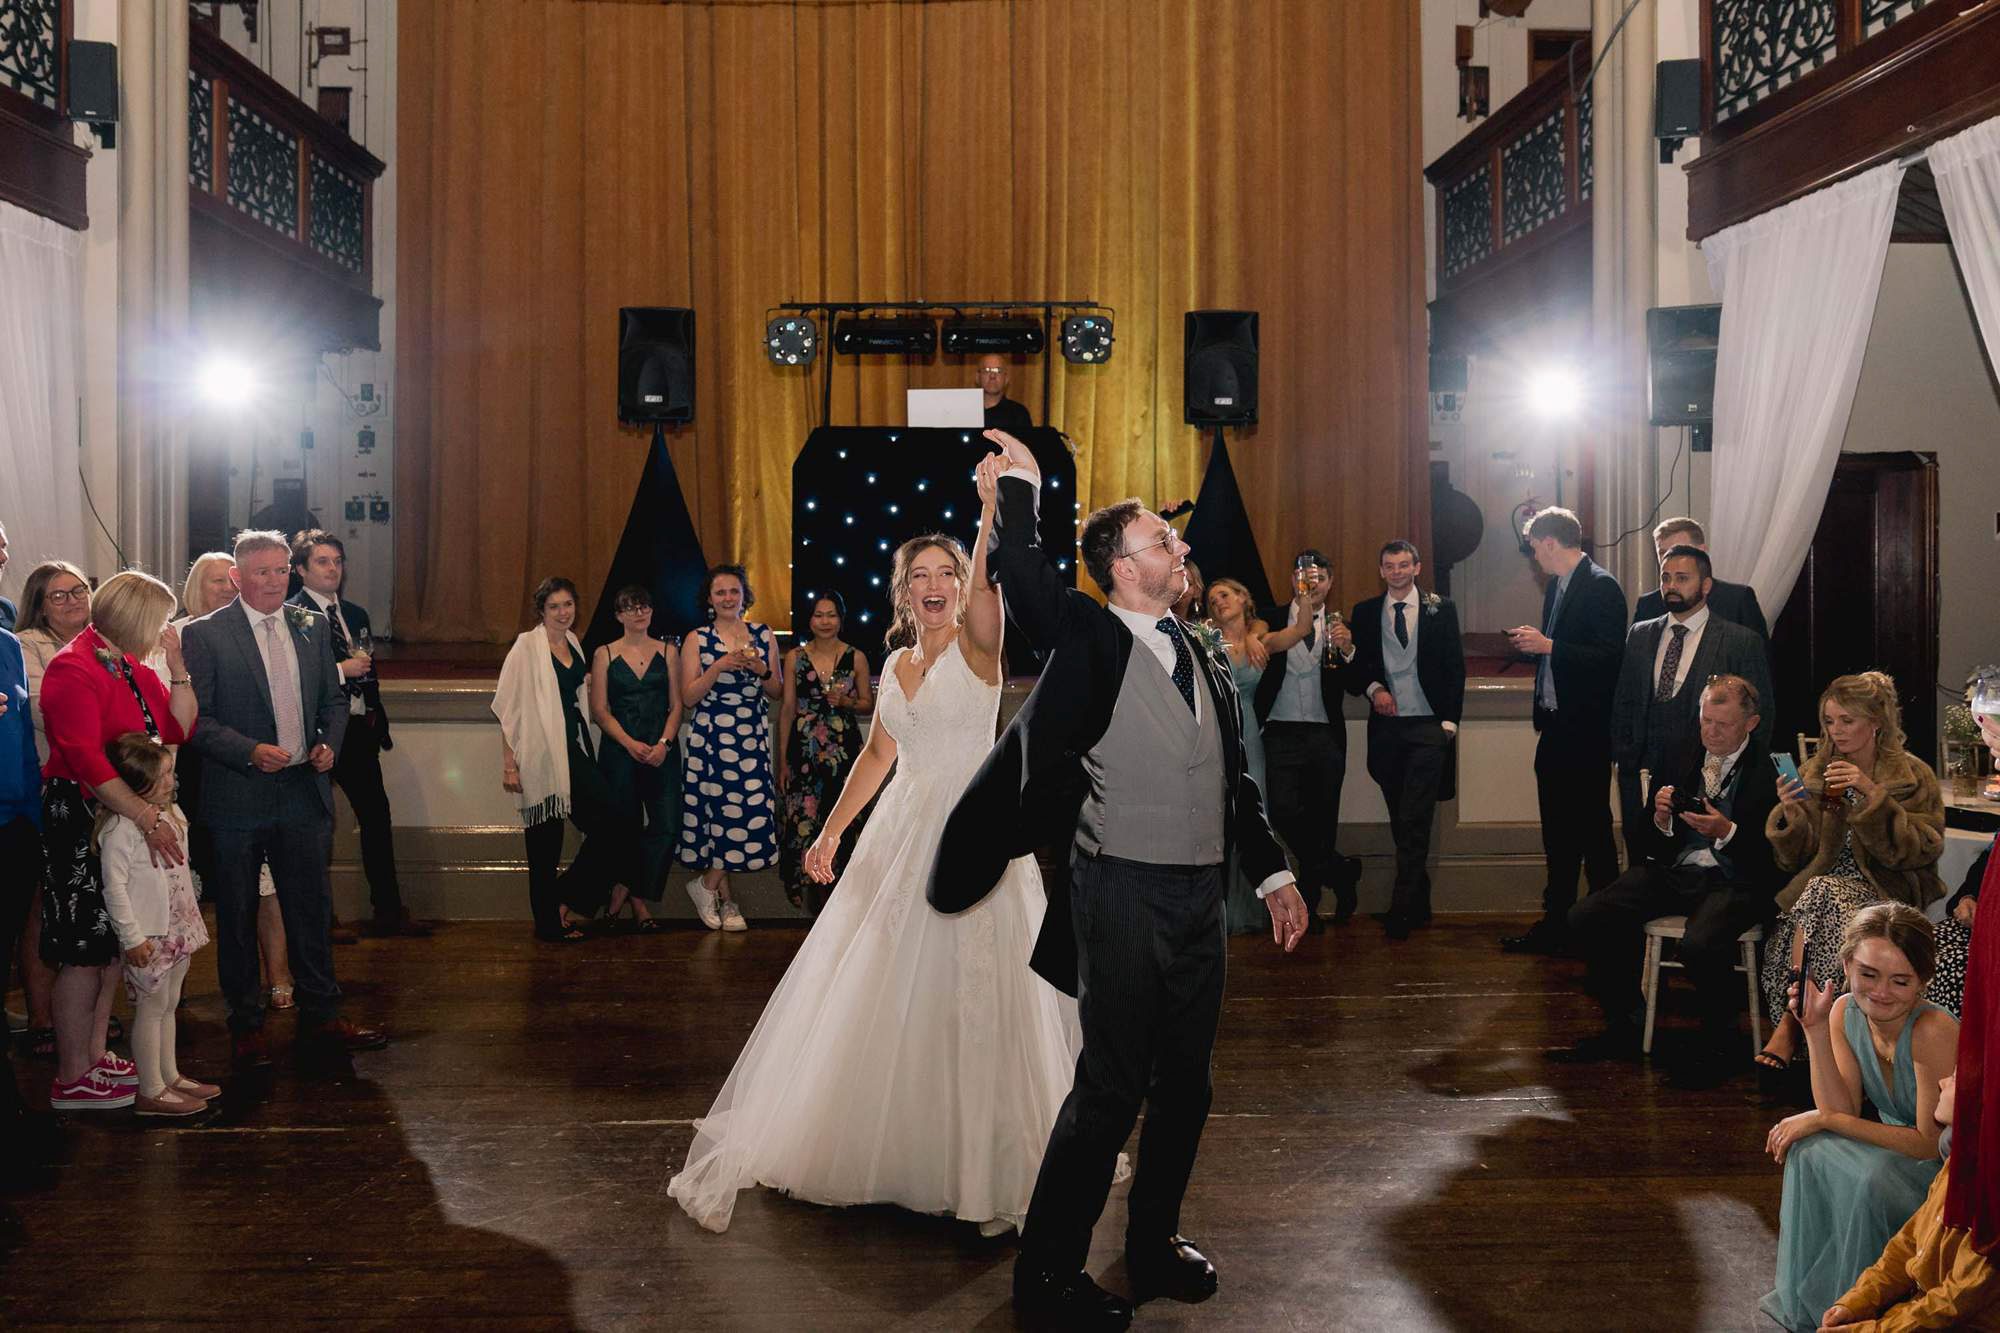 Bride and groom have their first dance together on their wedding day at Salomons Estate in Tunbridge Wells.